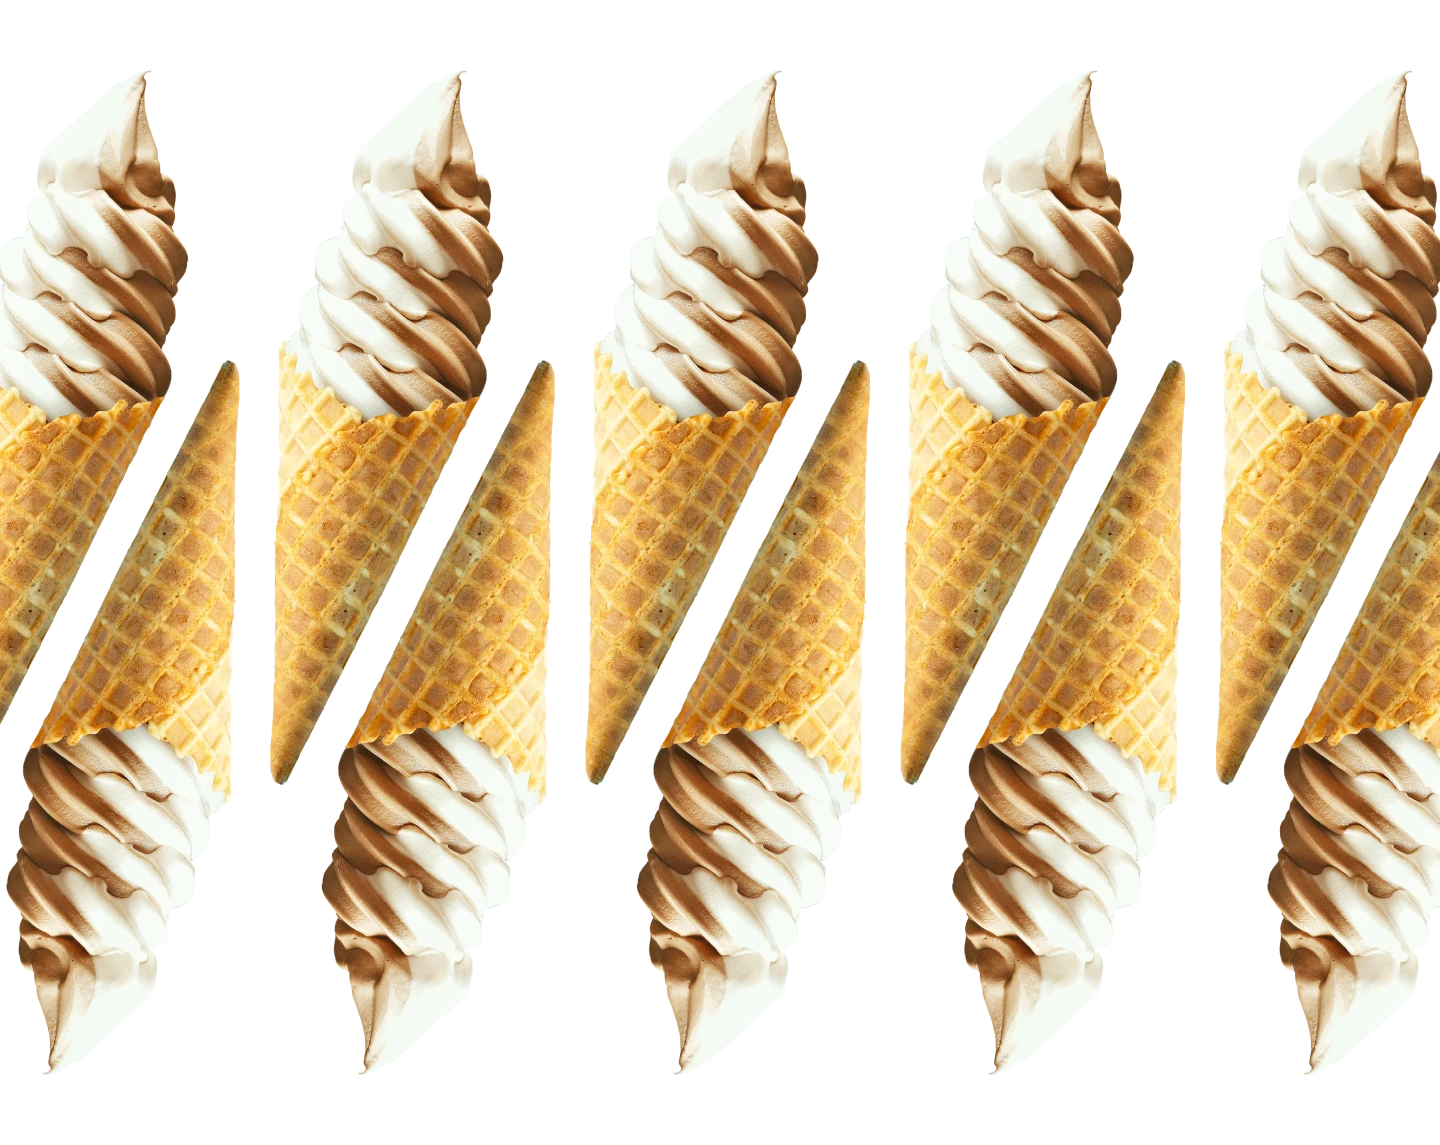 A row of Soft Serve Ice Cream in Waffle Cones